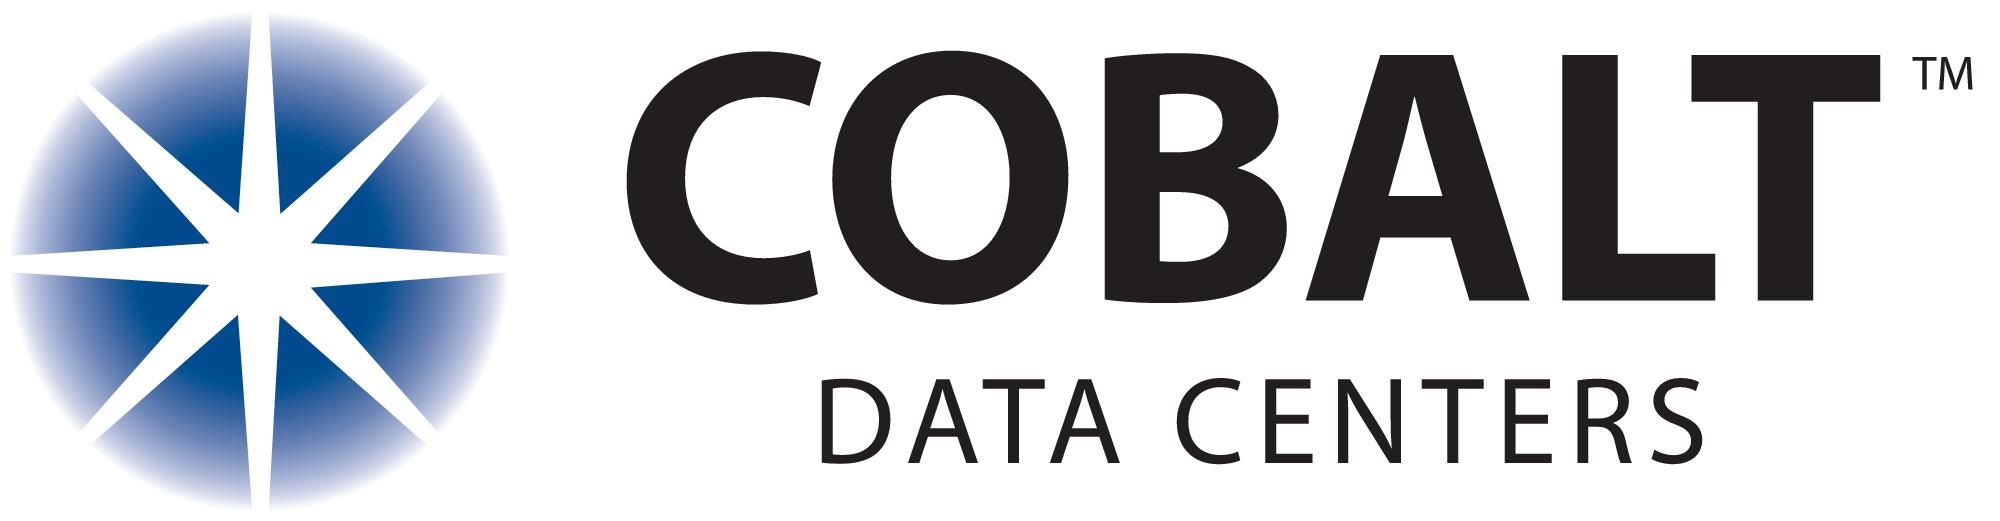 Cobalt Data Centers Featured by the Data Center Post